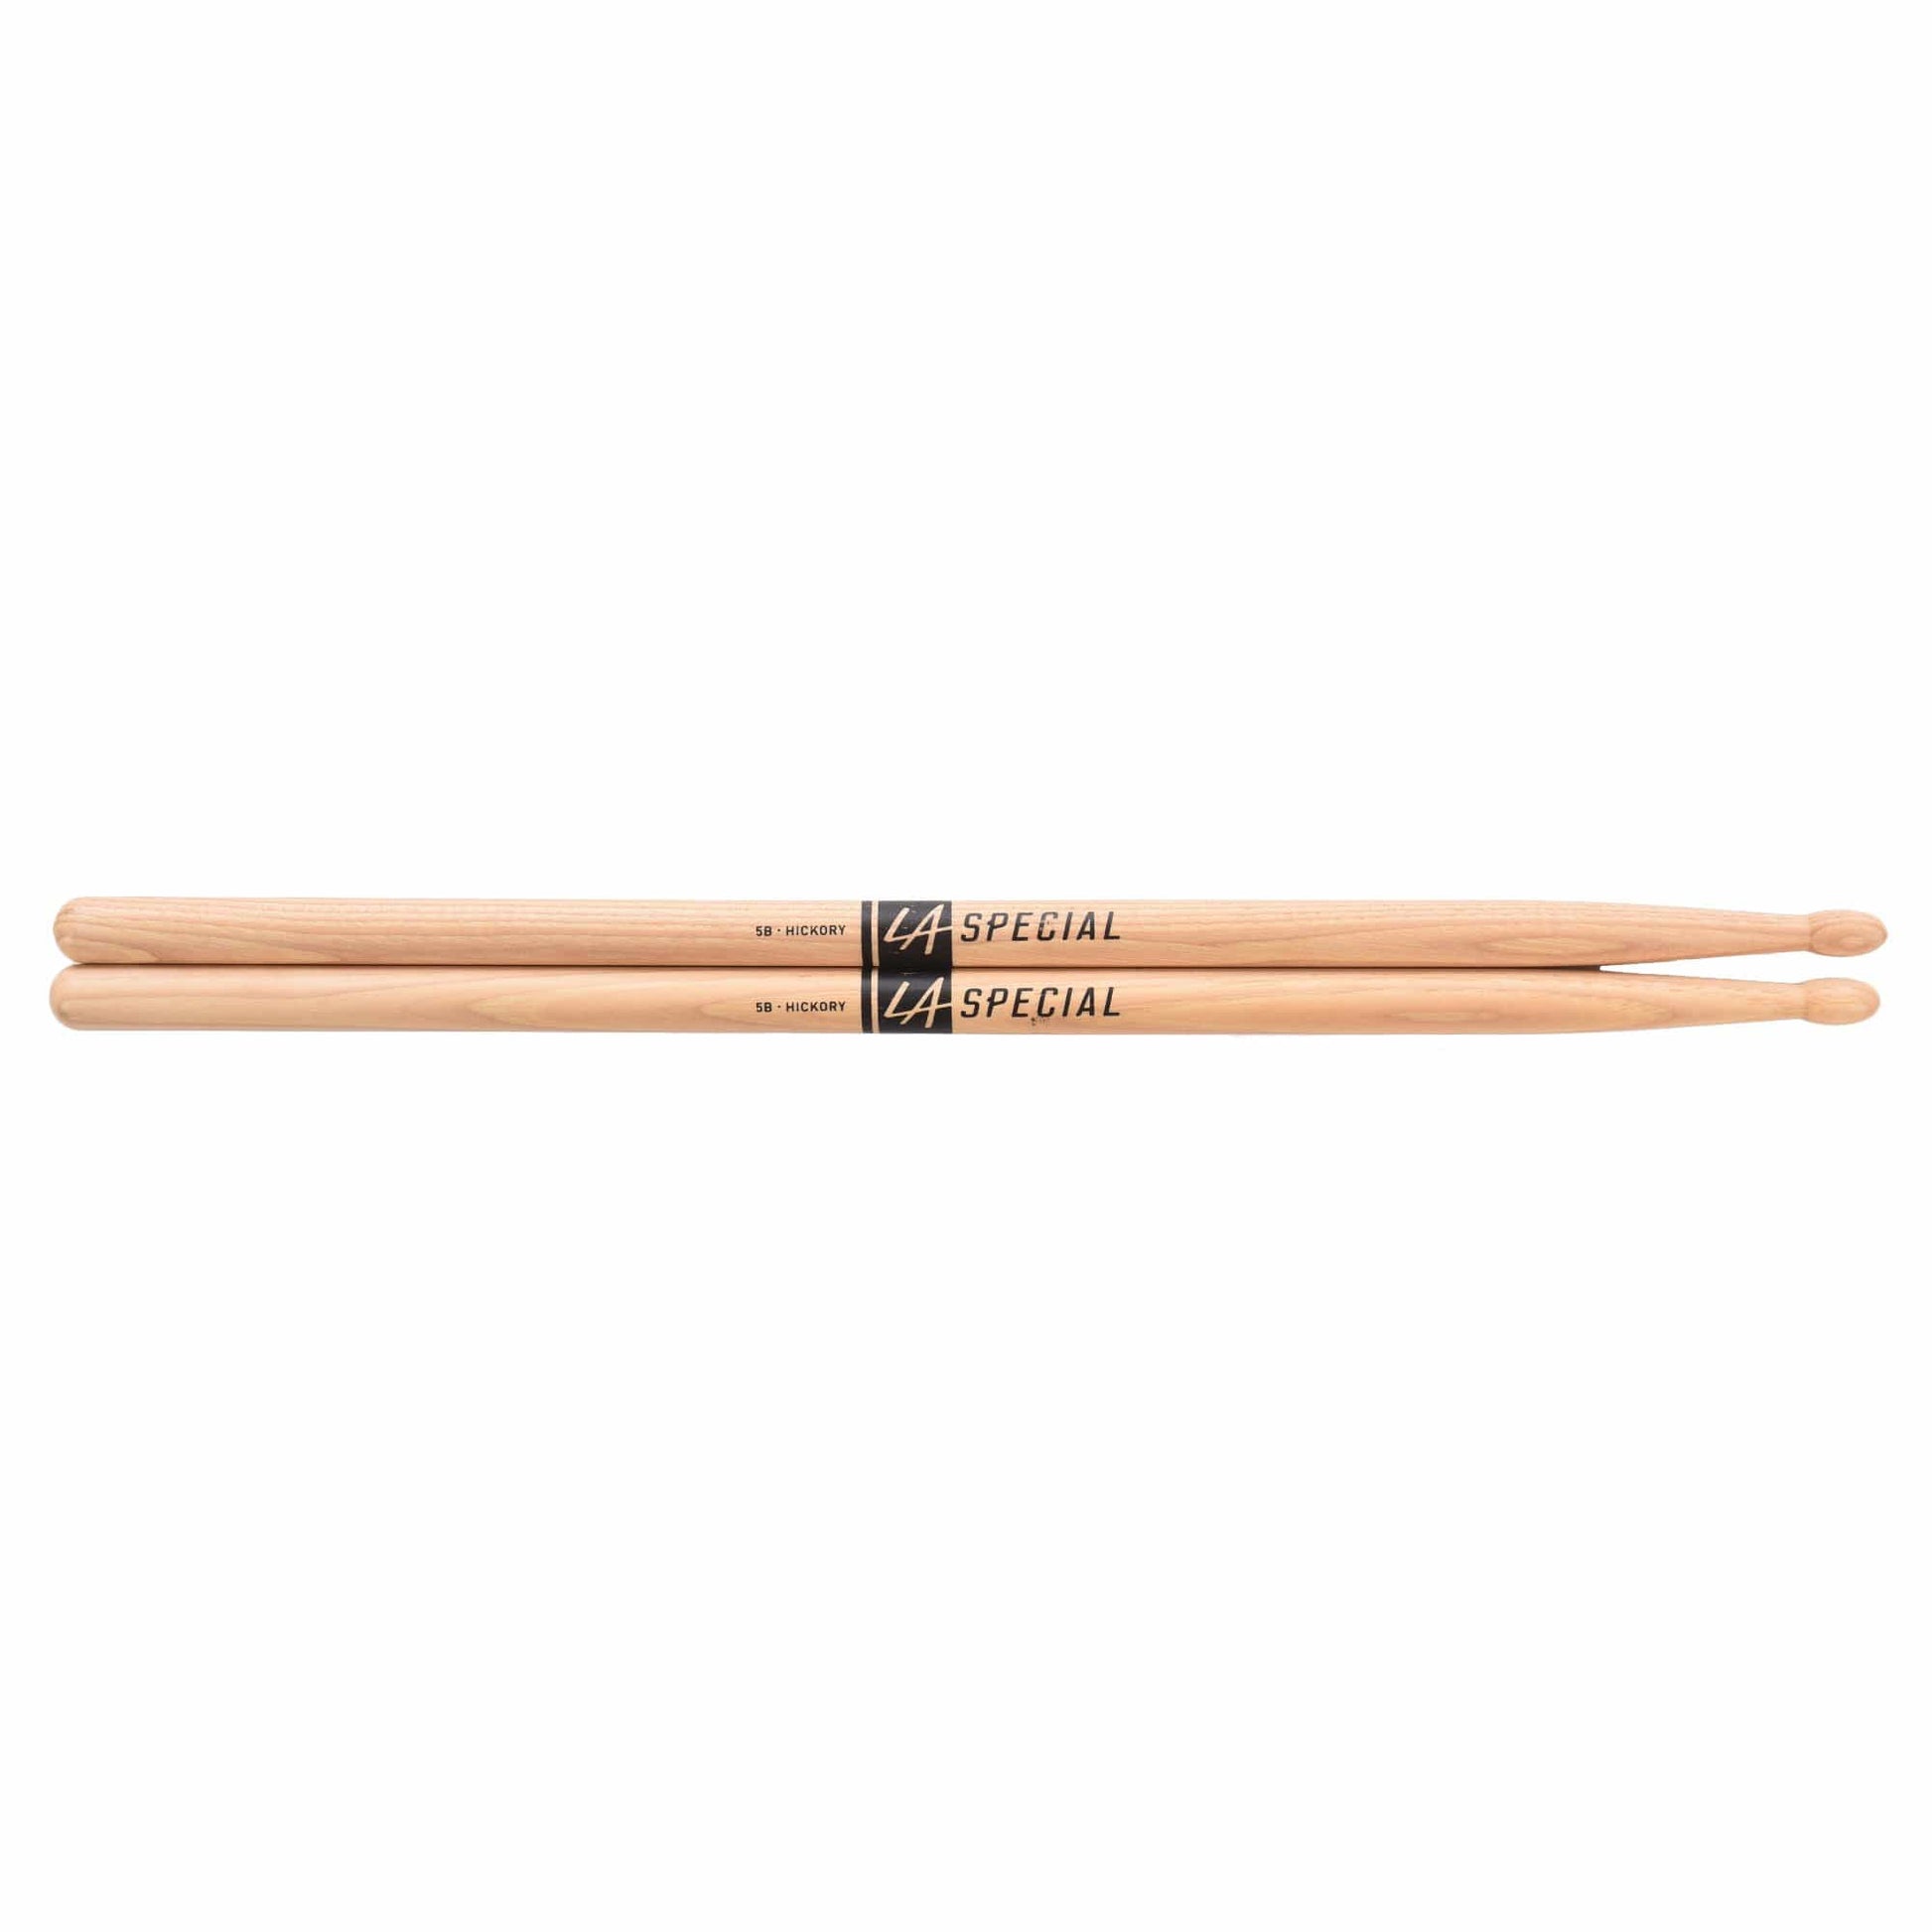 Promark LA Special 5B Wood Tip Drumsticks Drums and Percussion / Parts and Accessories / Drum Sticks and Mallets